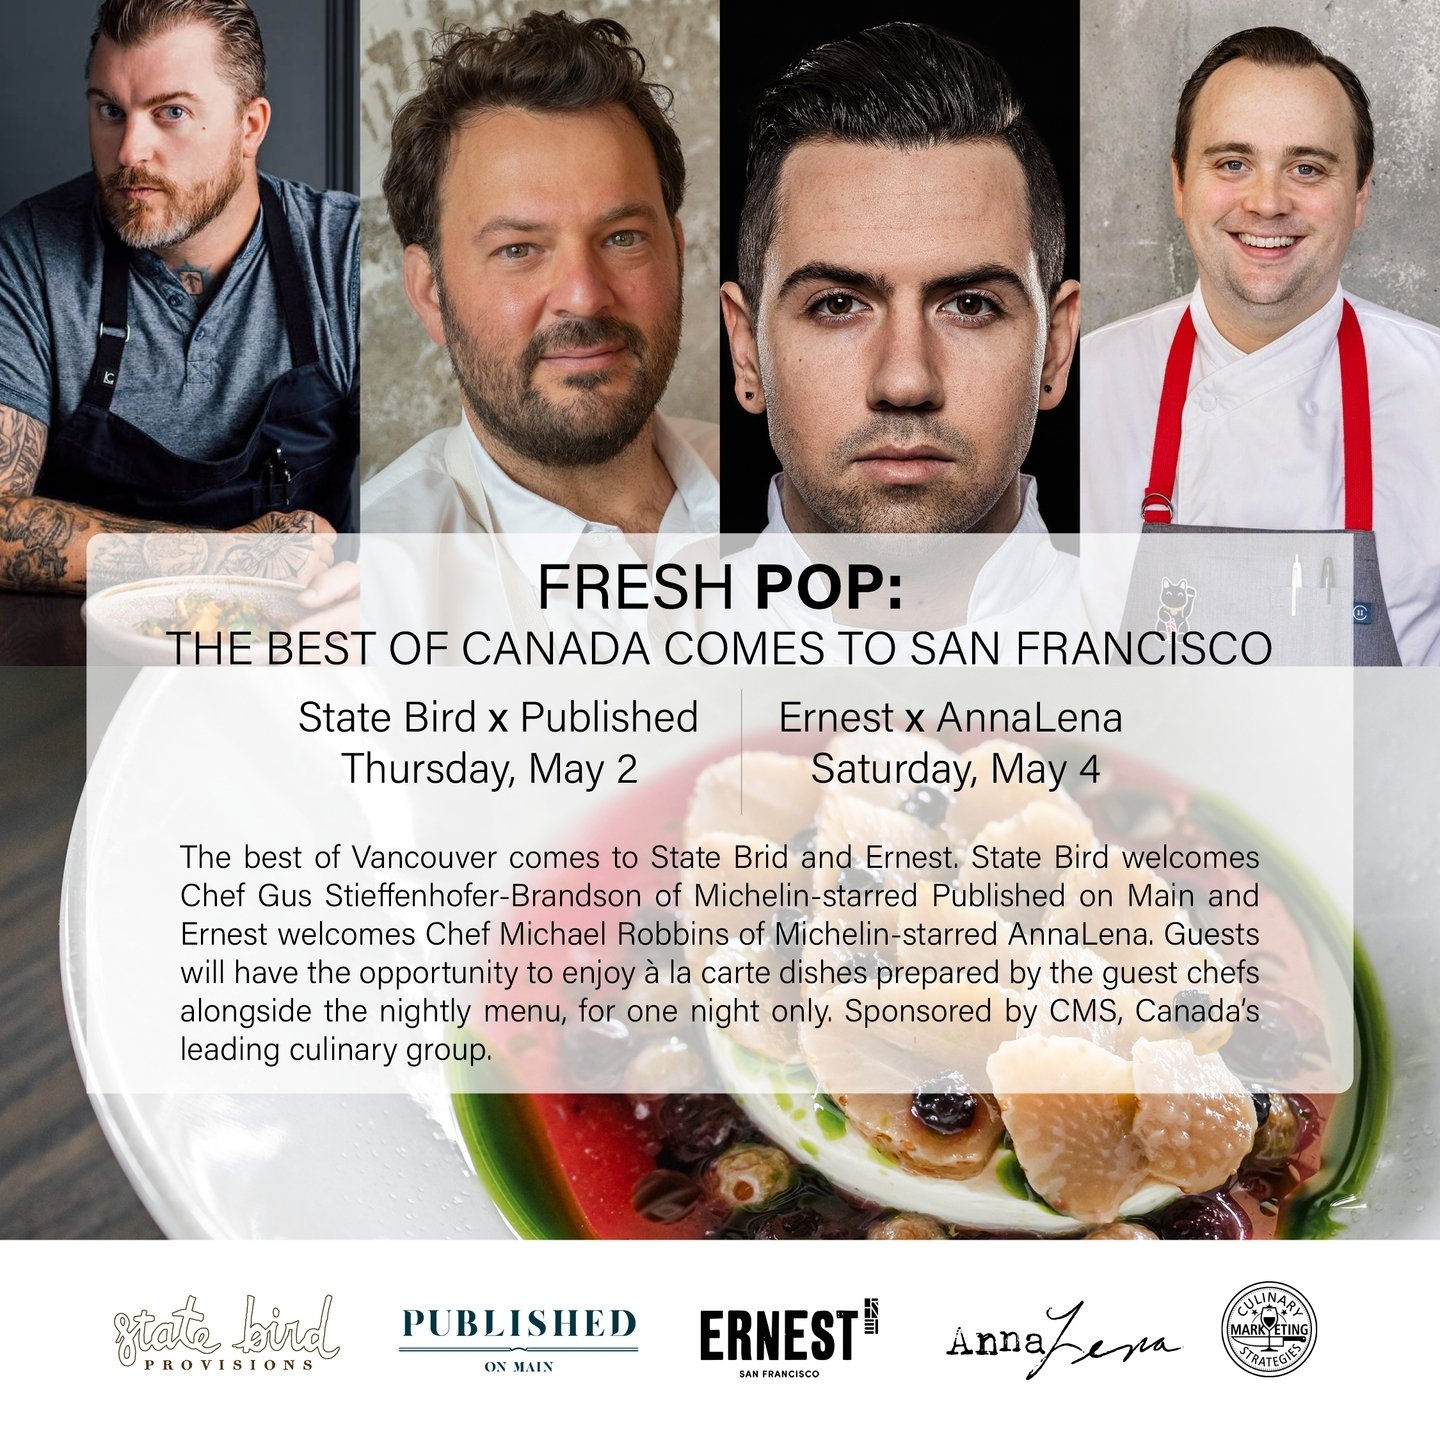 The best of Vancouver comes to State Brid and Ernest in San Francisco. State Bird welcomes Chef Gus Stieffenhofer-Brandson of Michelin-starred Published on Main and Ernest welcomes Chef Michael Robbins of Michelin-starred AnnaLena. Guests will have t